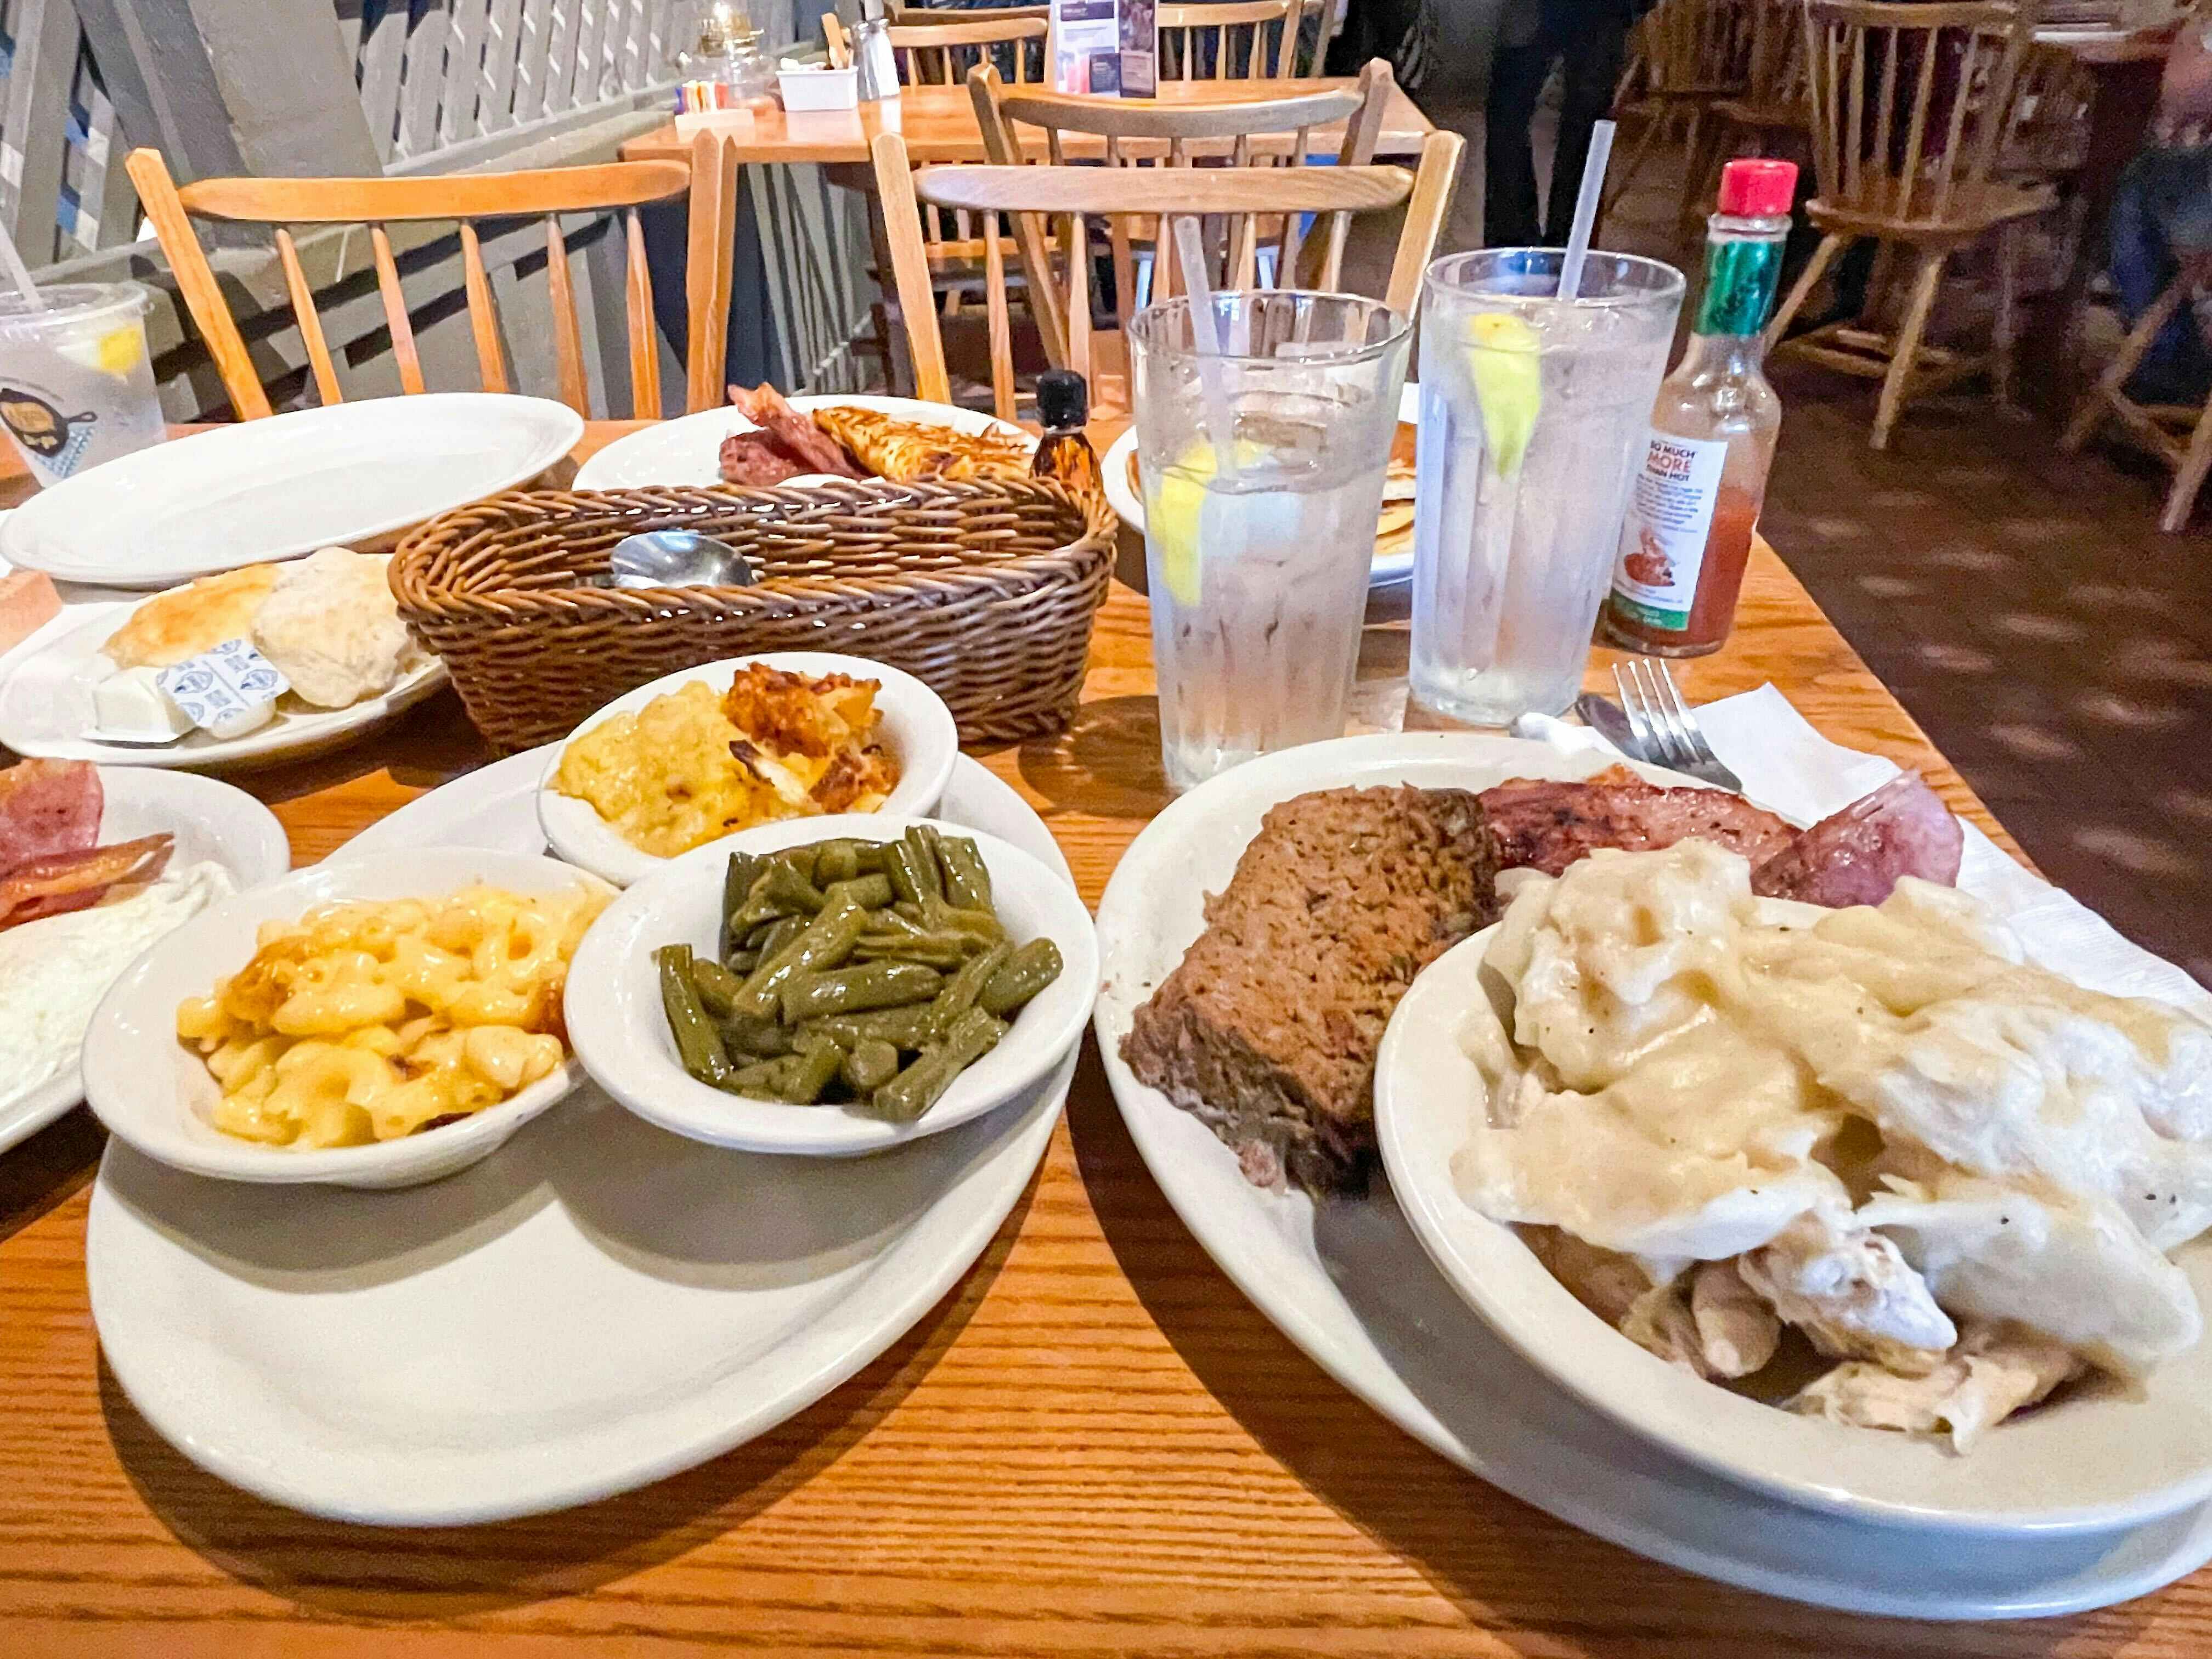 A table at Cracker Barrel covered with plates of different foods from the menu.